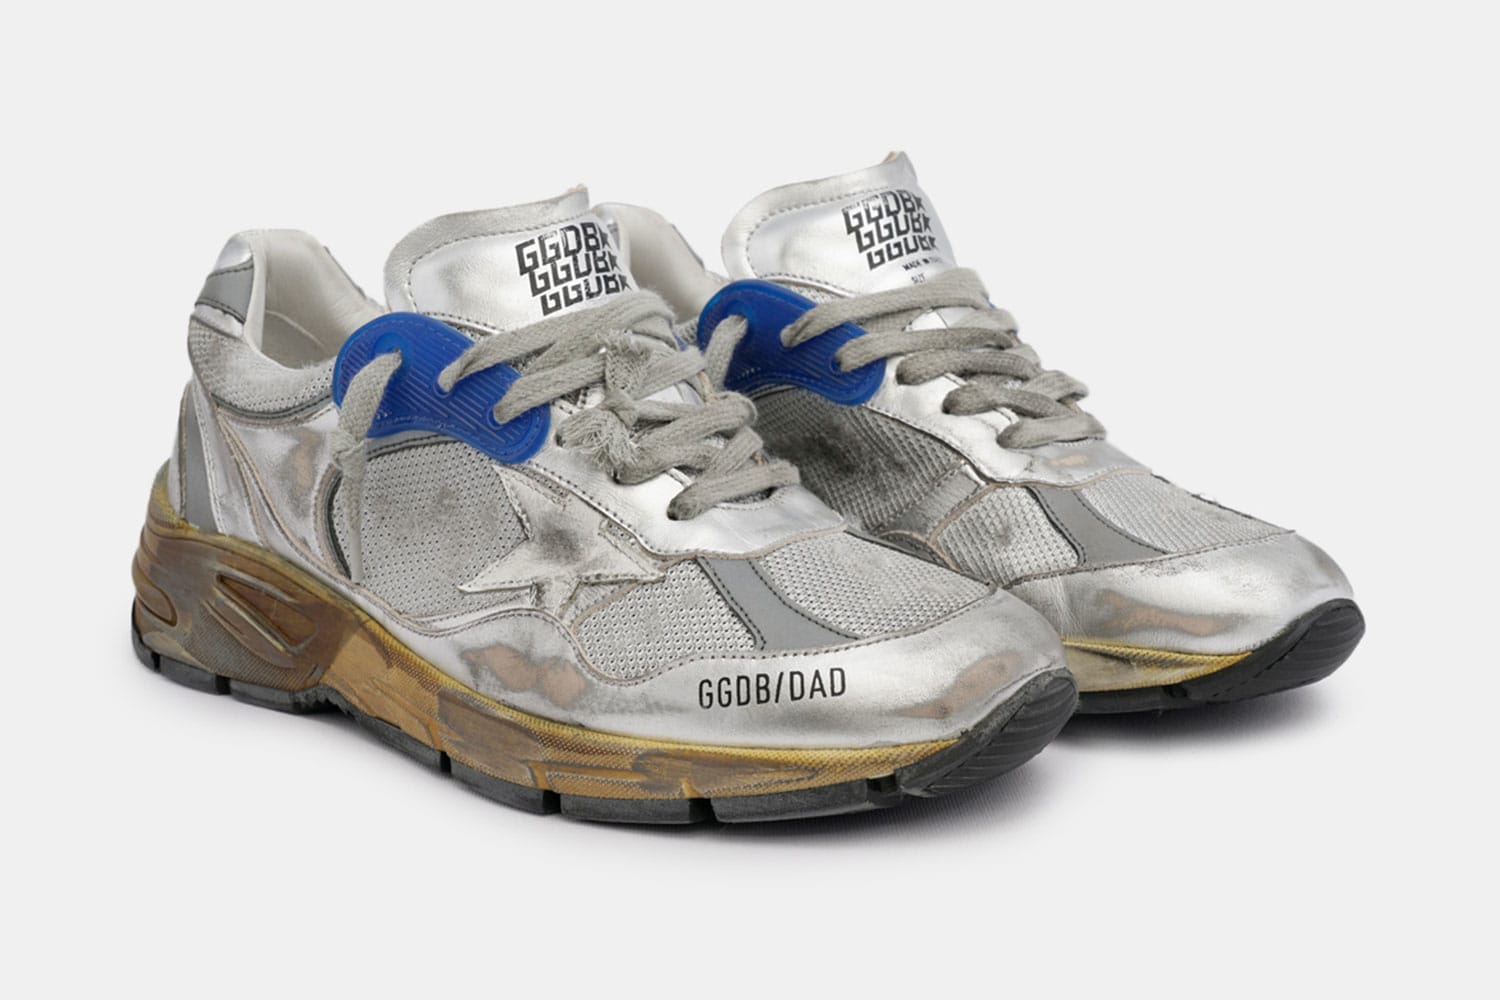 gold and silver golden goose sneakers